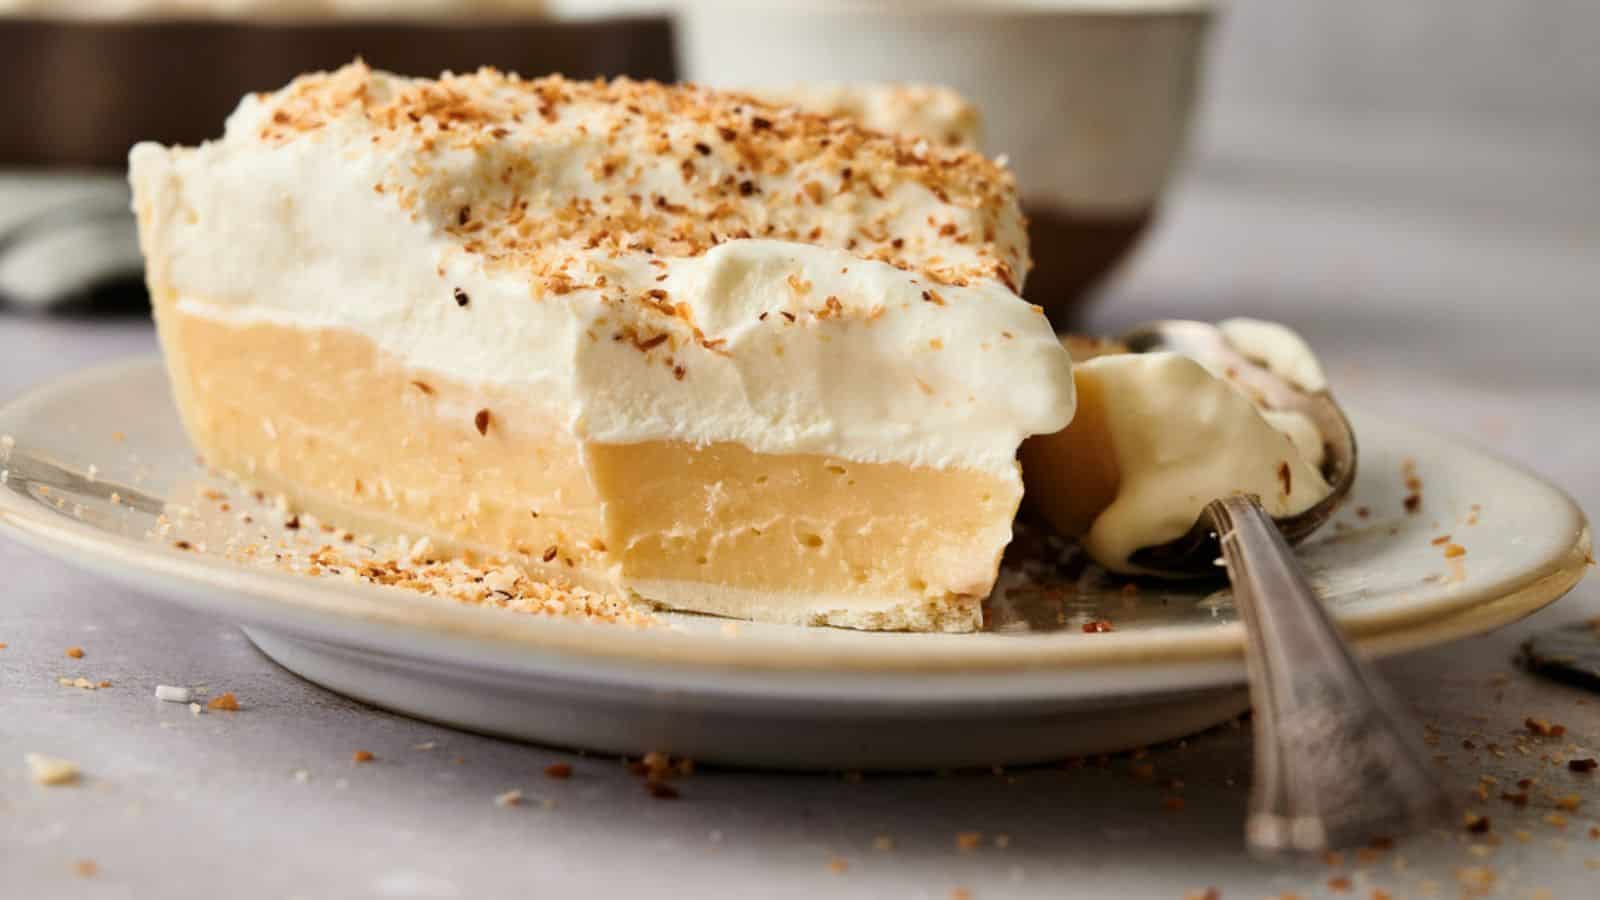 <p>Coconut Cream Pie is the ultimate dessert lifesaver. With its creamy, coconutty goodness and flaky crust, it rescues mealtime from dessert dilemmas. This pie ensures your sweet ending is delightful and memorable, saving you from any dessert disasters along the way.<br><strong>Get the Recipe: </strong><a href="https://www.splashoftaste.com/homemade-classic-coconut-cream-pie-easy-recipe/?utm_source=msn&utm_medium=page&utm_campaign=msn">Coconut Cream Pie</a></p> <div class="remoji_bar">          <div class="remoji_error_bar">   Error happened.   </div>  </div> <p>The post <a rel="nofollow" href="https://fooddrinklife.com/lifesaving-recipes/">Avoid mealtime disaster: 29 lifesaving recipes</a> appeared first on <a rel="nofollow" href="https://fooddrinklife.com">Food Drink Life</a>.</p>